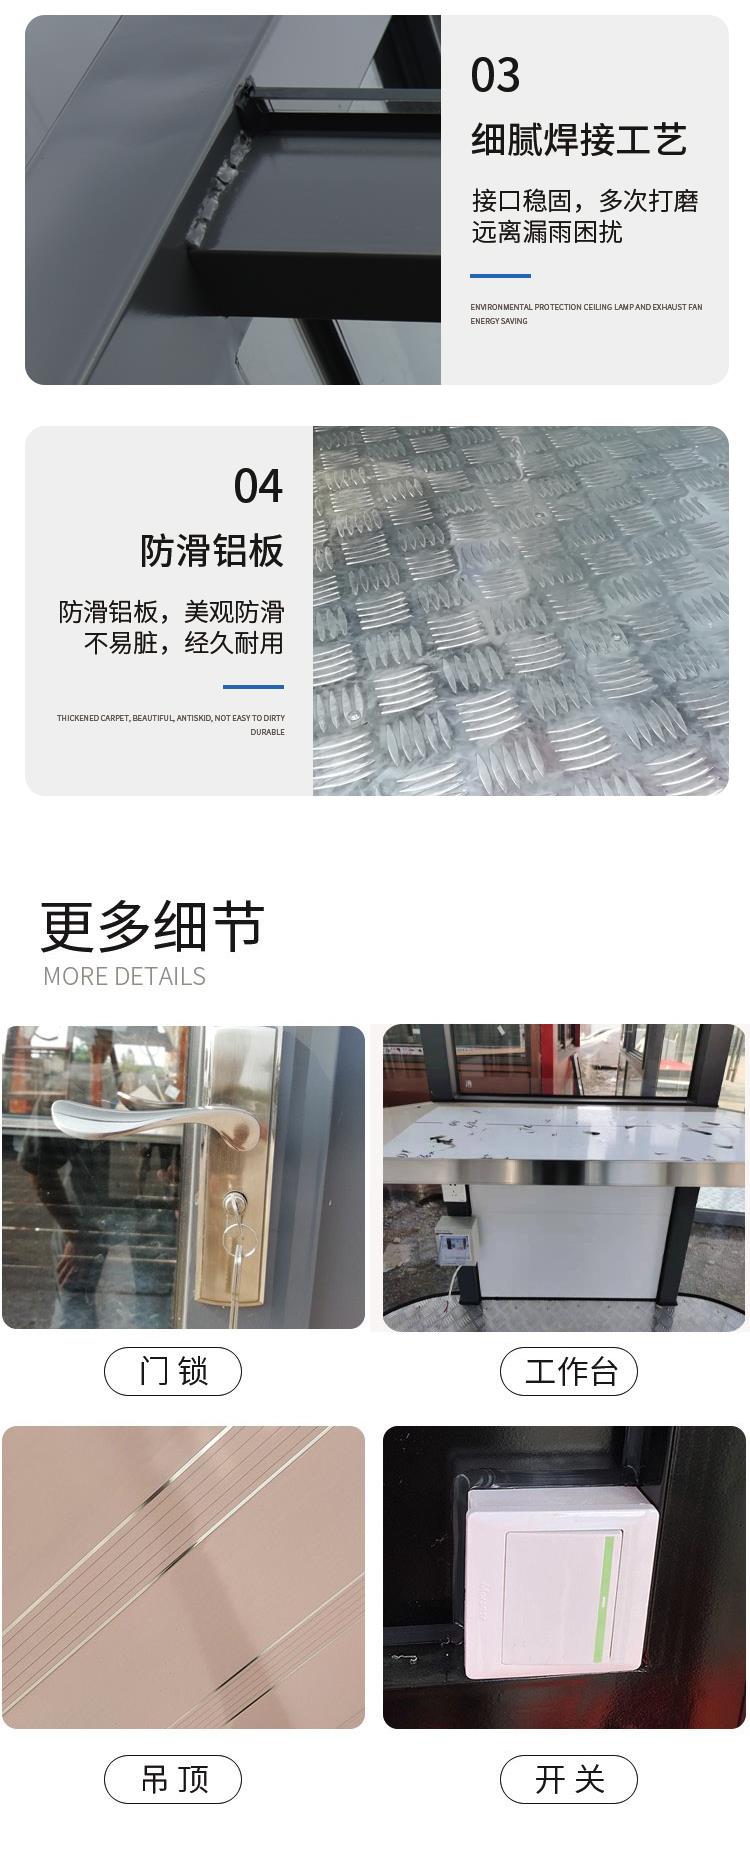 Manufacturer's outdoor real stone paint security mobile booth, finished duty room, parking lot, sales office, toll station